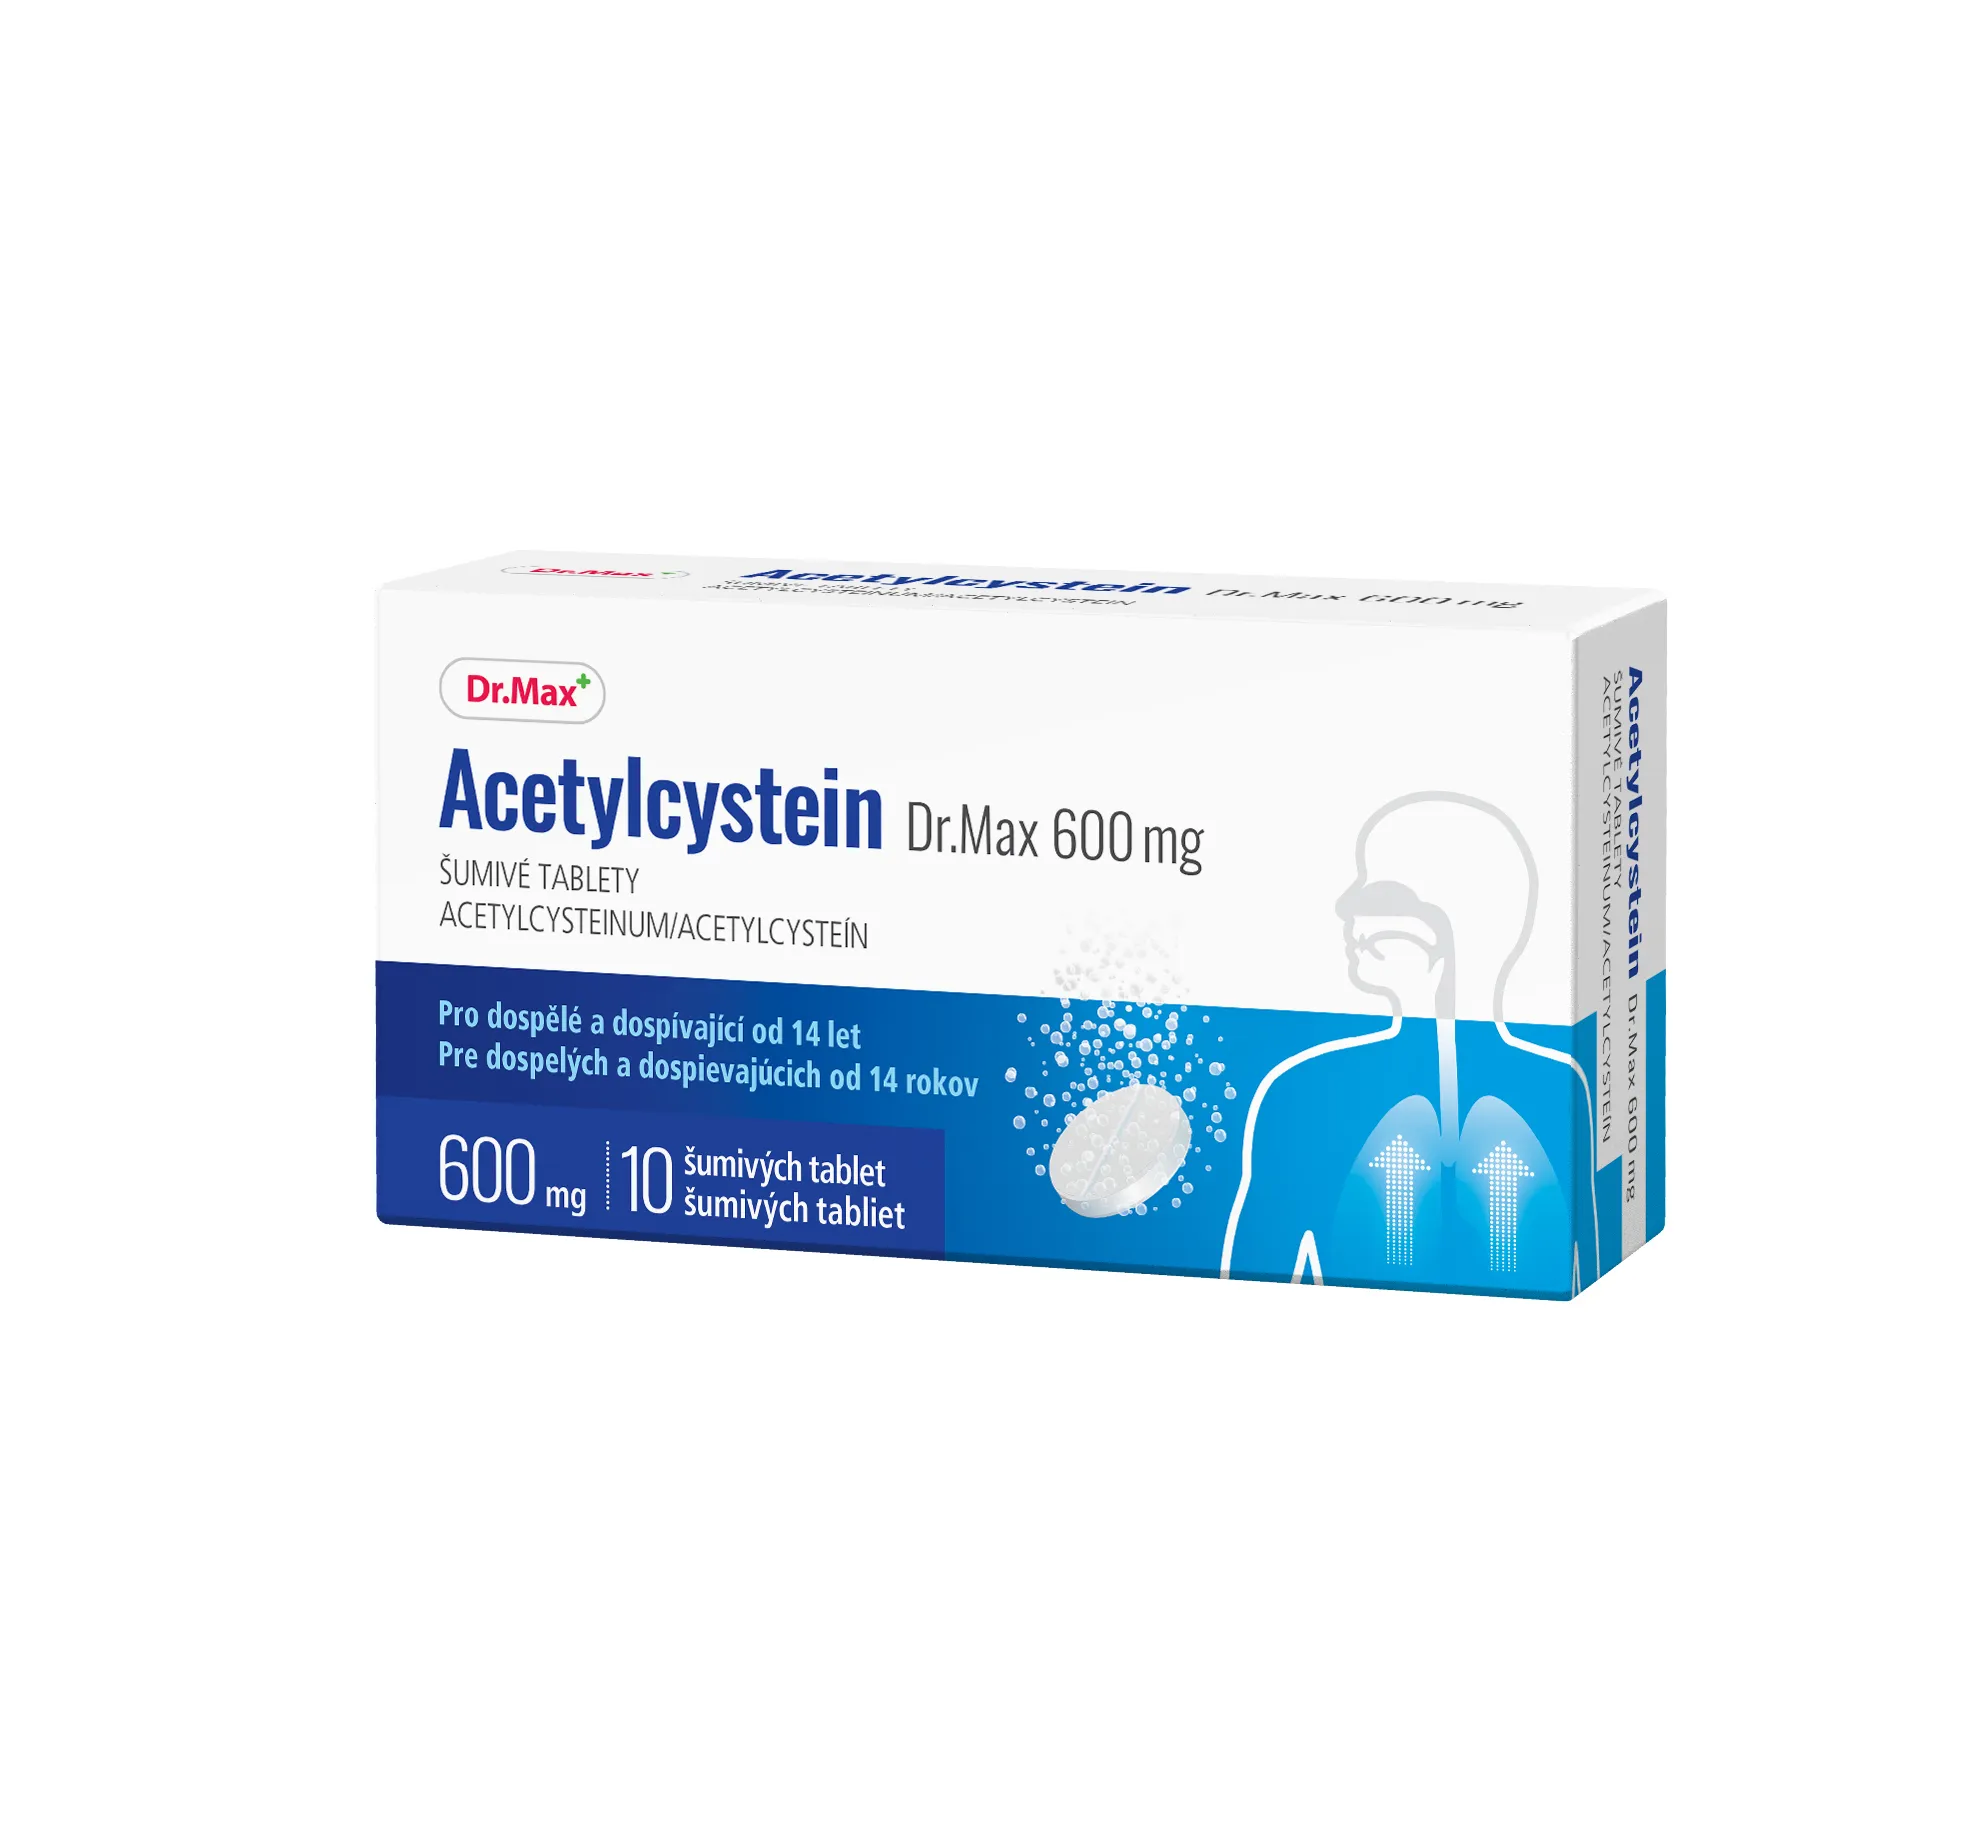 Dr.Max Acetylcystein 600 mg